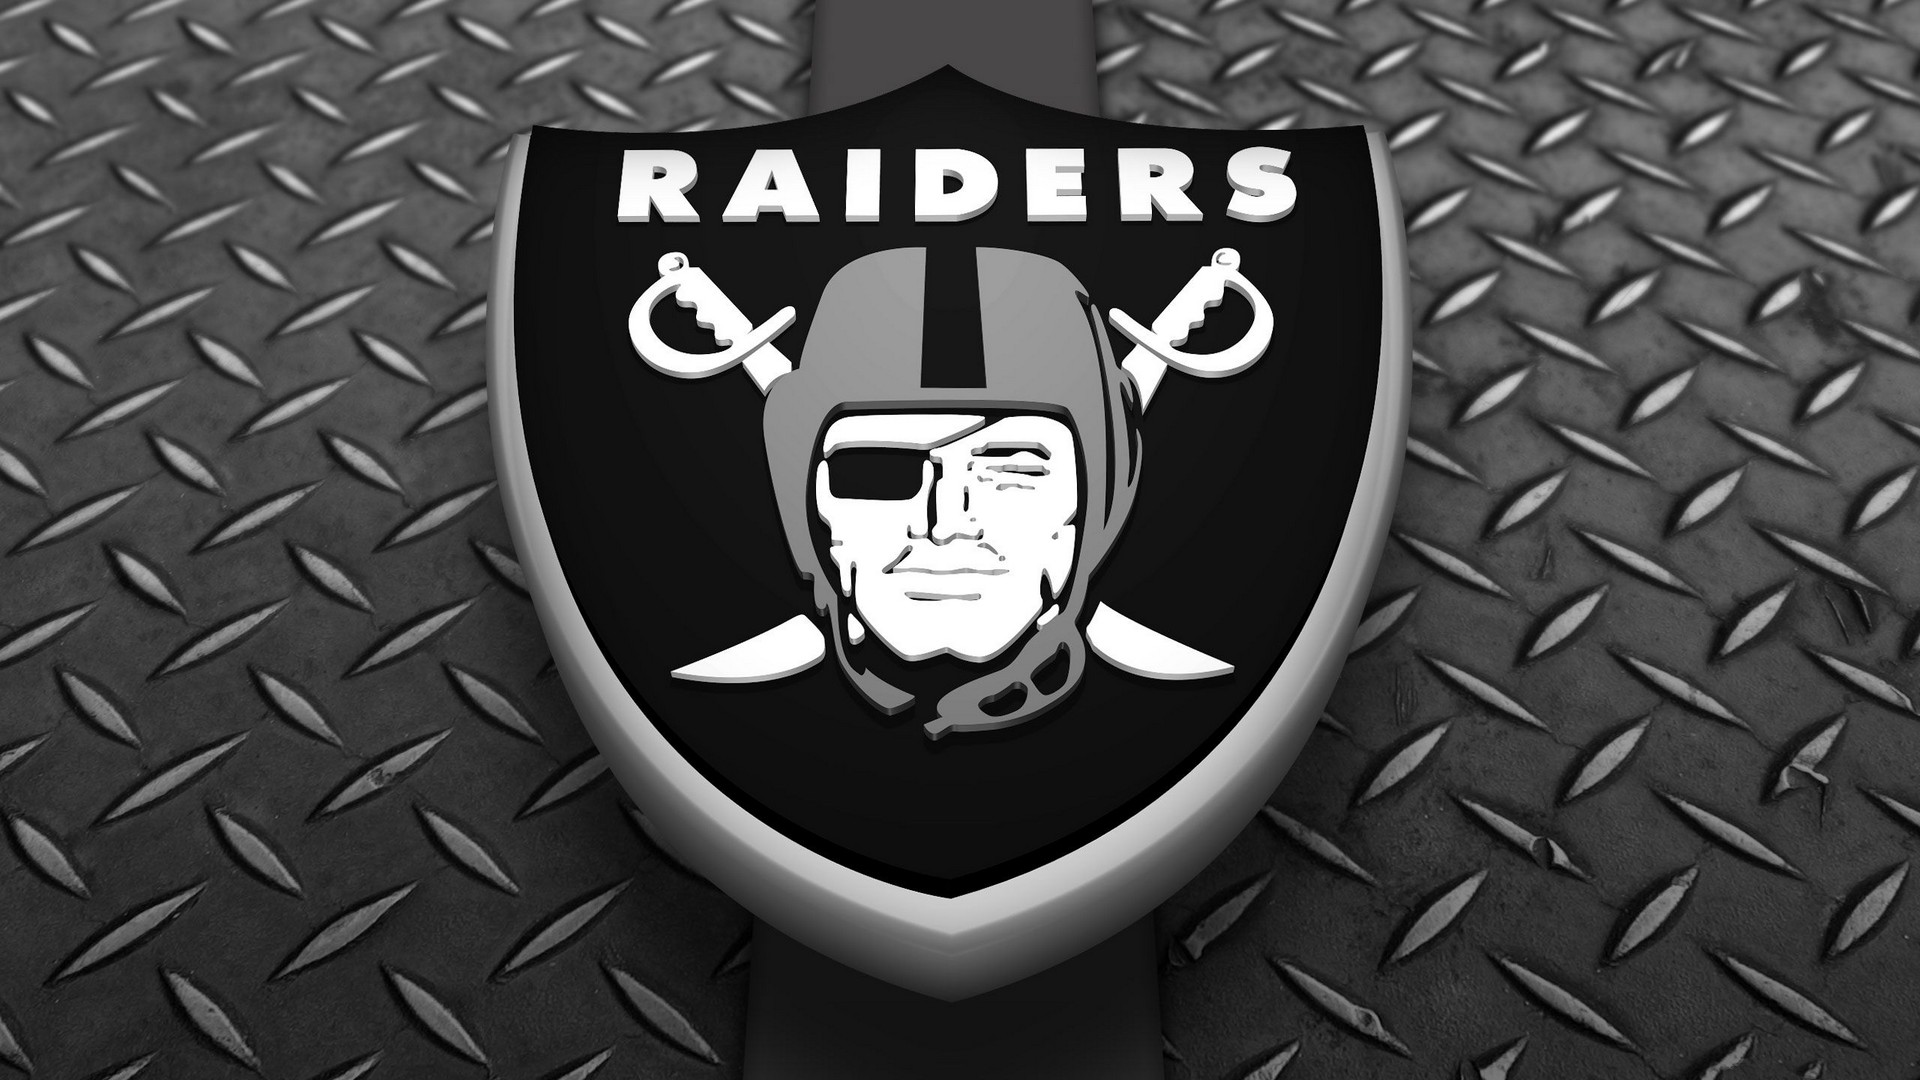 Oakland Raiders For Mac With high-resolution 1920X1080 pixel. You can use this wallpaper for your Mac or Windows Desktop Background, iPhone, Android or Tablet and another Smartphone device